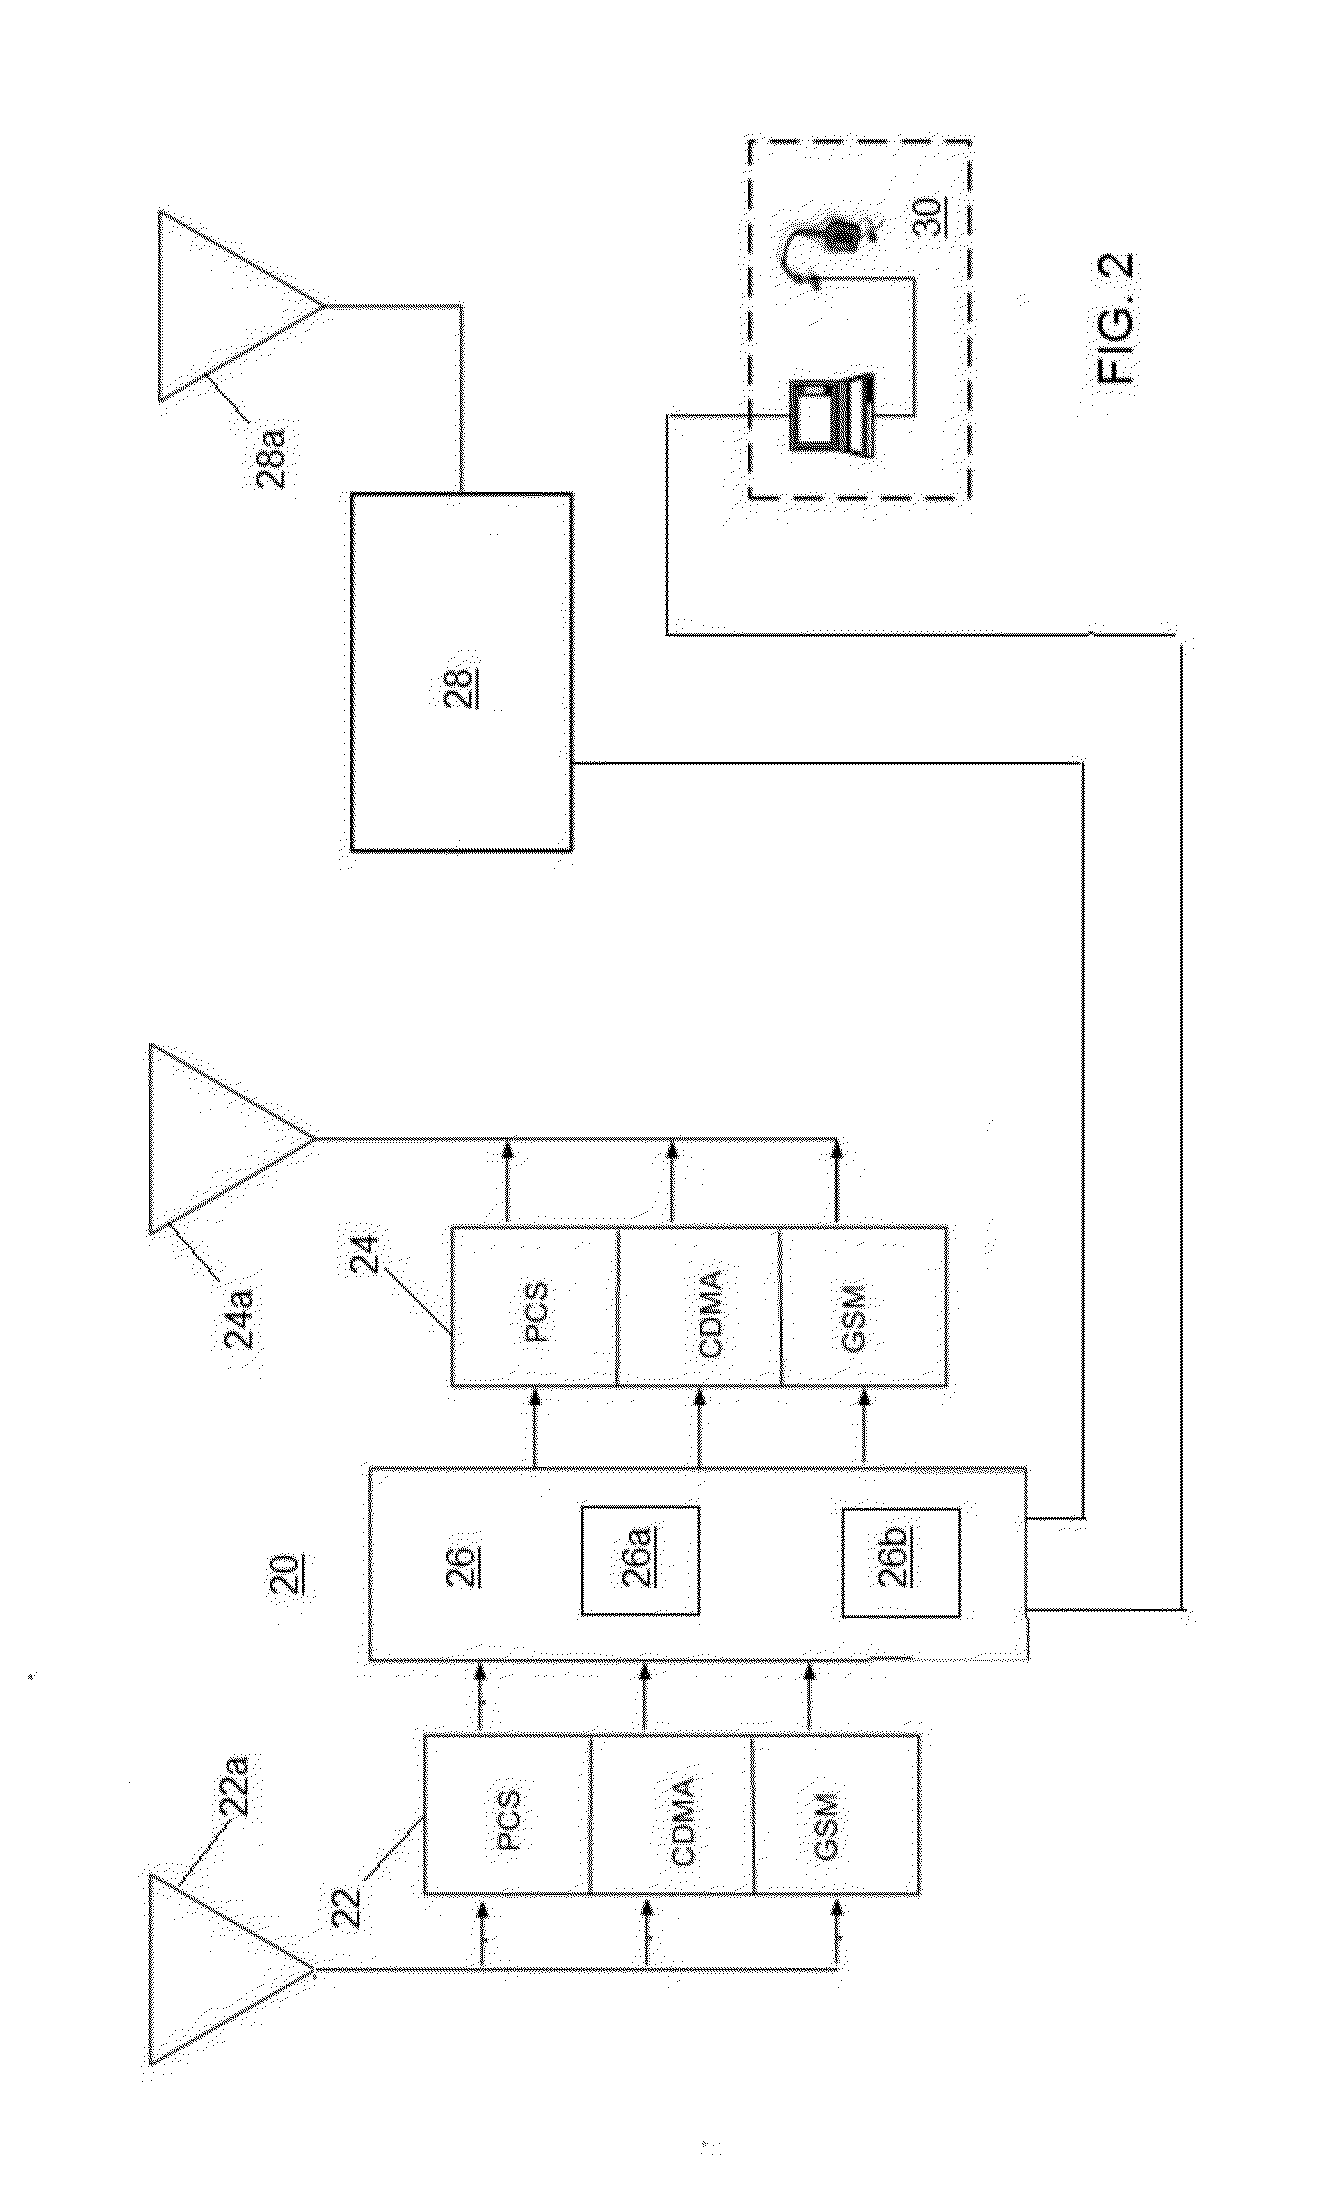 Mobile cellular node method and apparatus for emergency relief and rescue